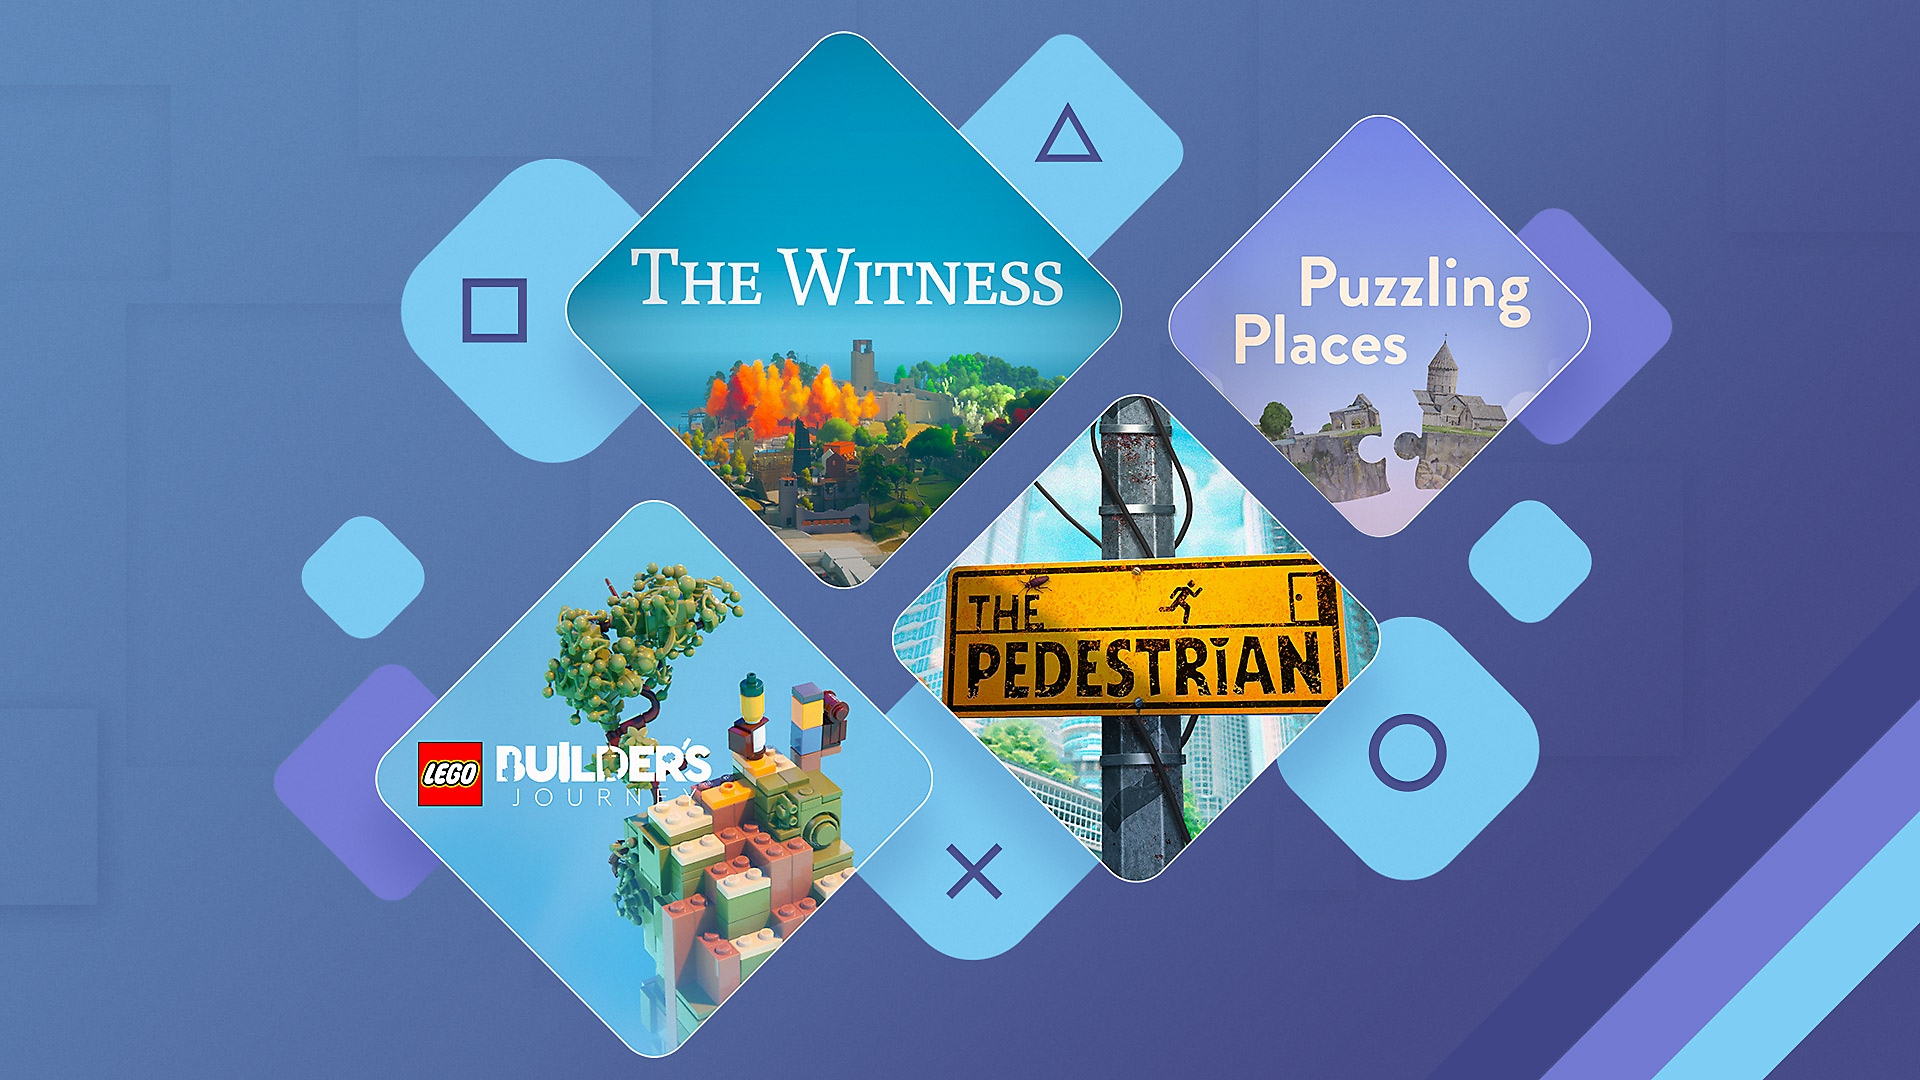 The best puzzle games on PS4 and PS5 promotional artwork featuring The Witness, Ghost Giant, Lego Builder's Journey and The Pedestrian.